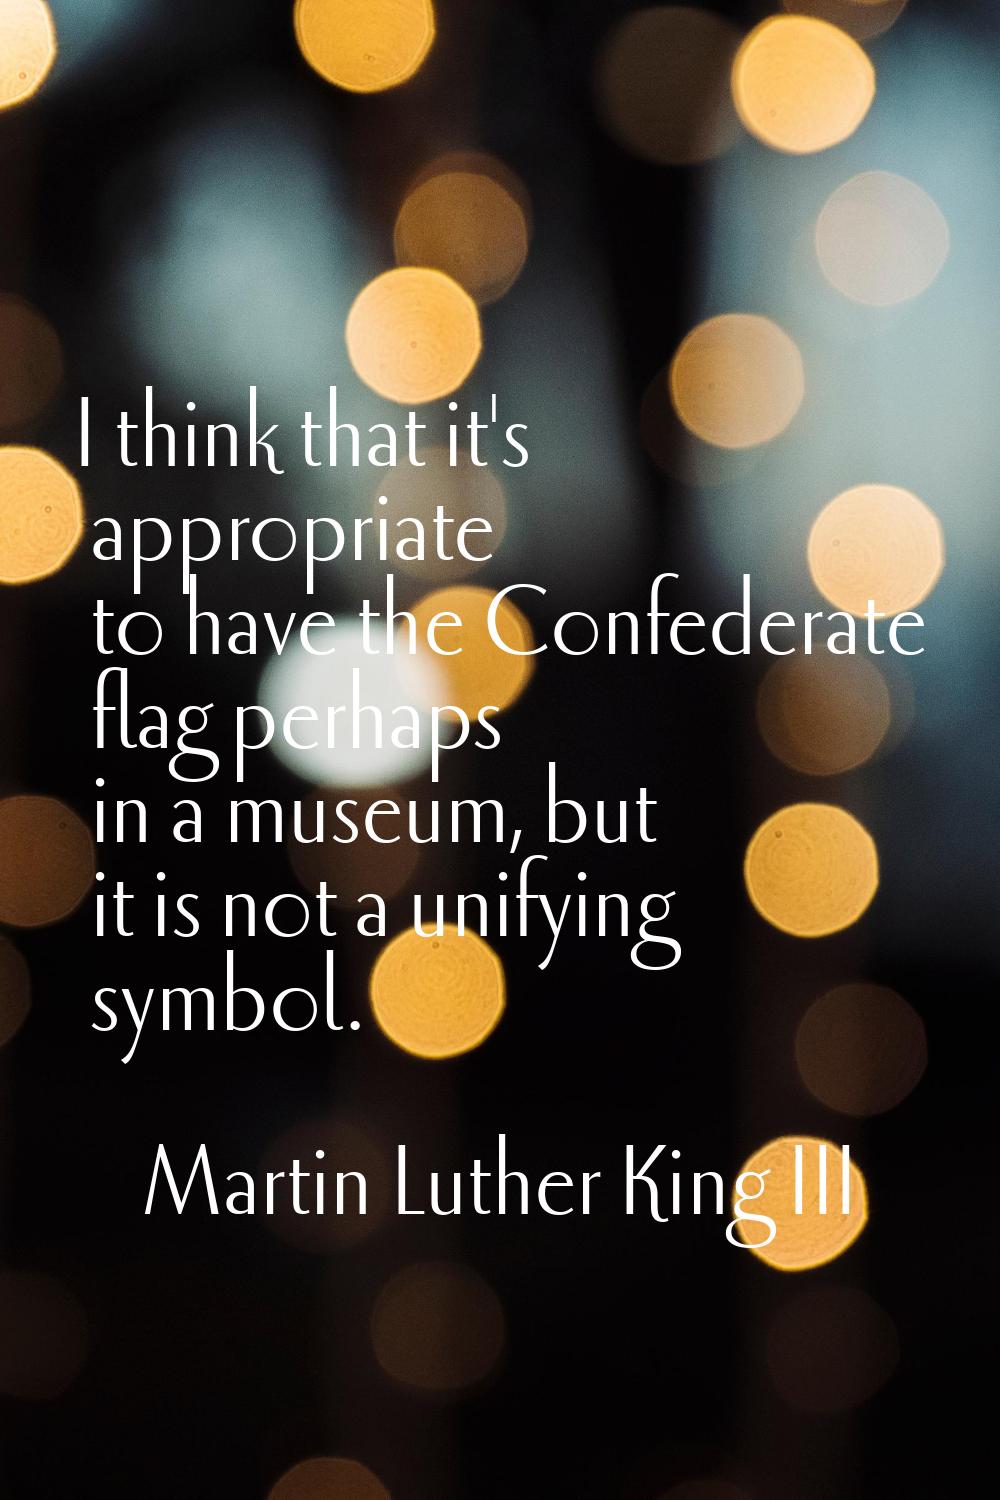 I think that it's appropriate to have the Confederate flag perhaps in a museum, but it is not a uni